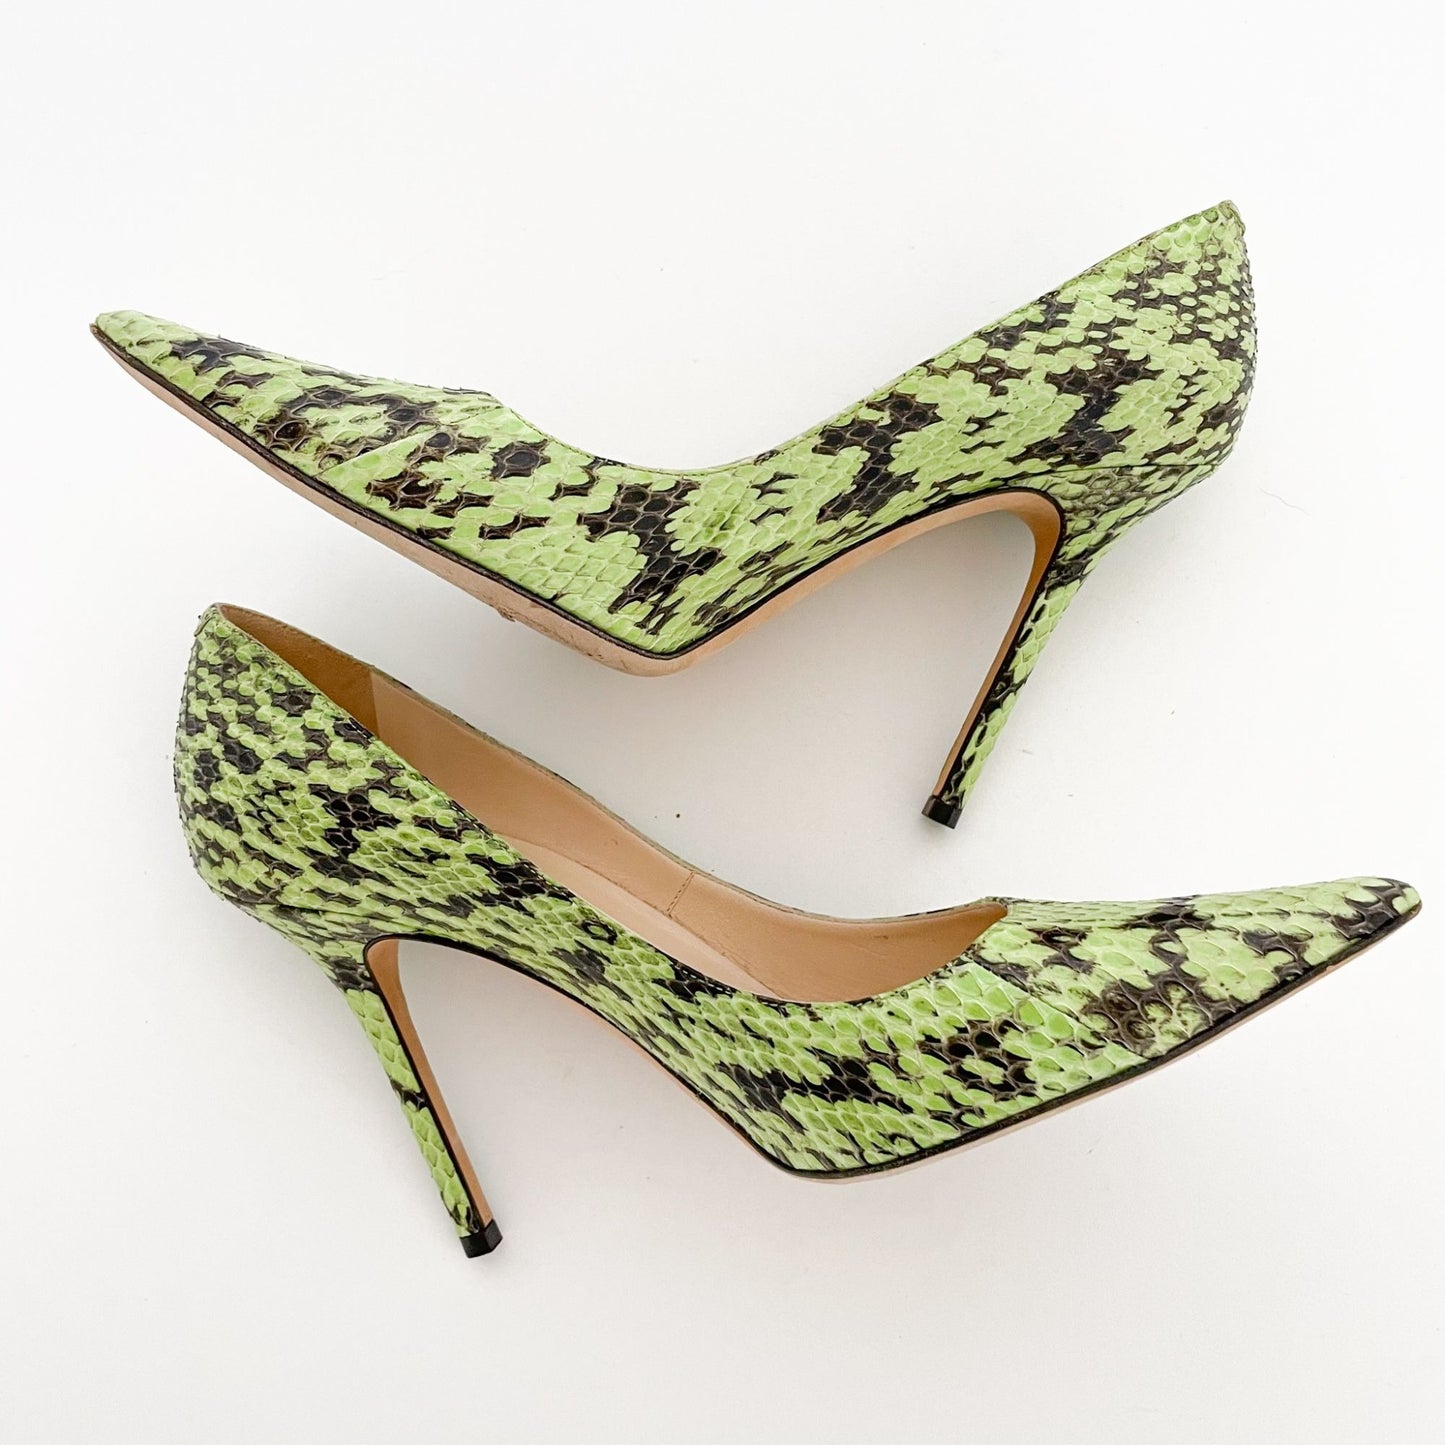 Jimmy Choo Anouk 110 Pumps in Green Snake Embossed Leather Size 40